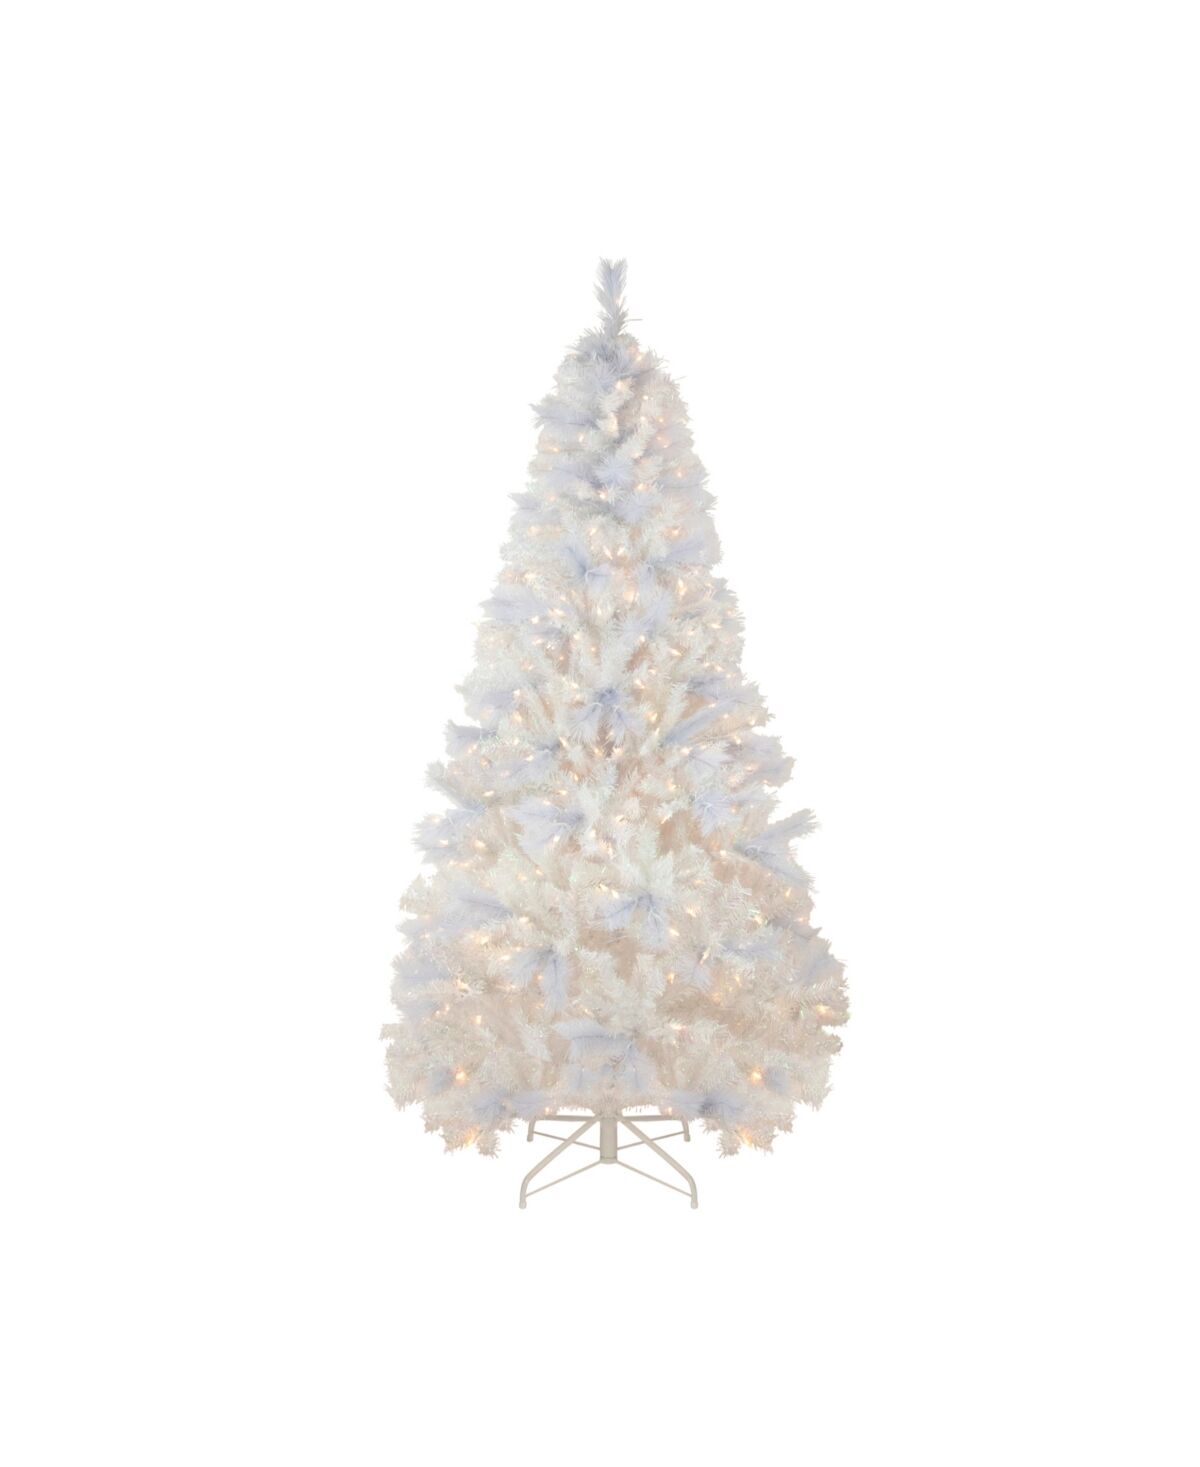 Northlight 7.5' Pre-Lit Seneca Spruce Artificial Christmas Tree with Dual Function Led Lights - White